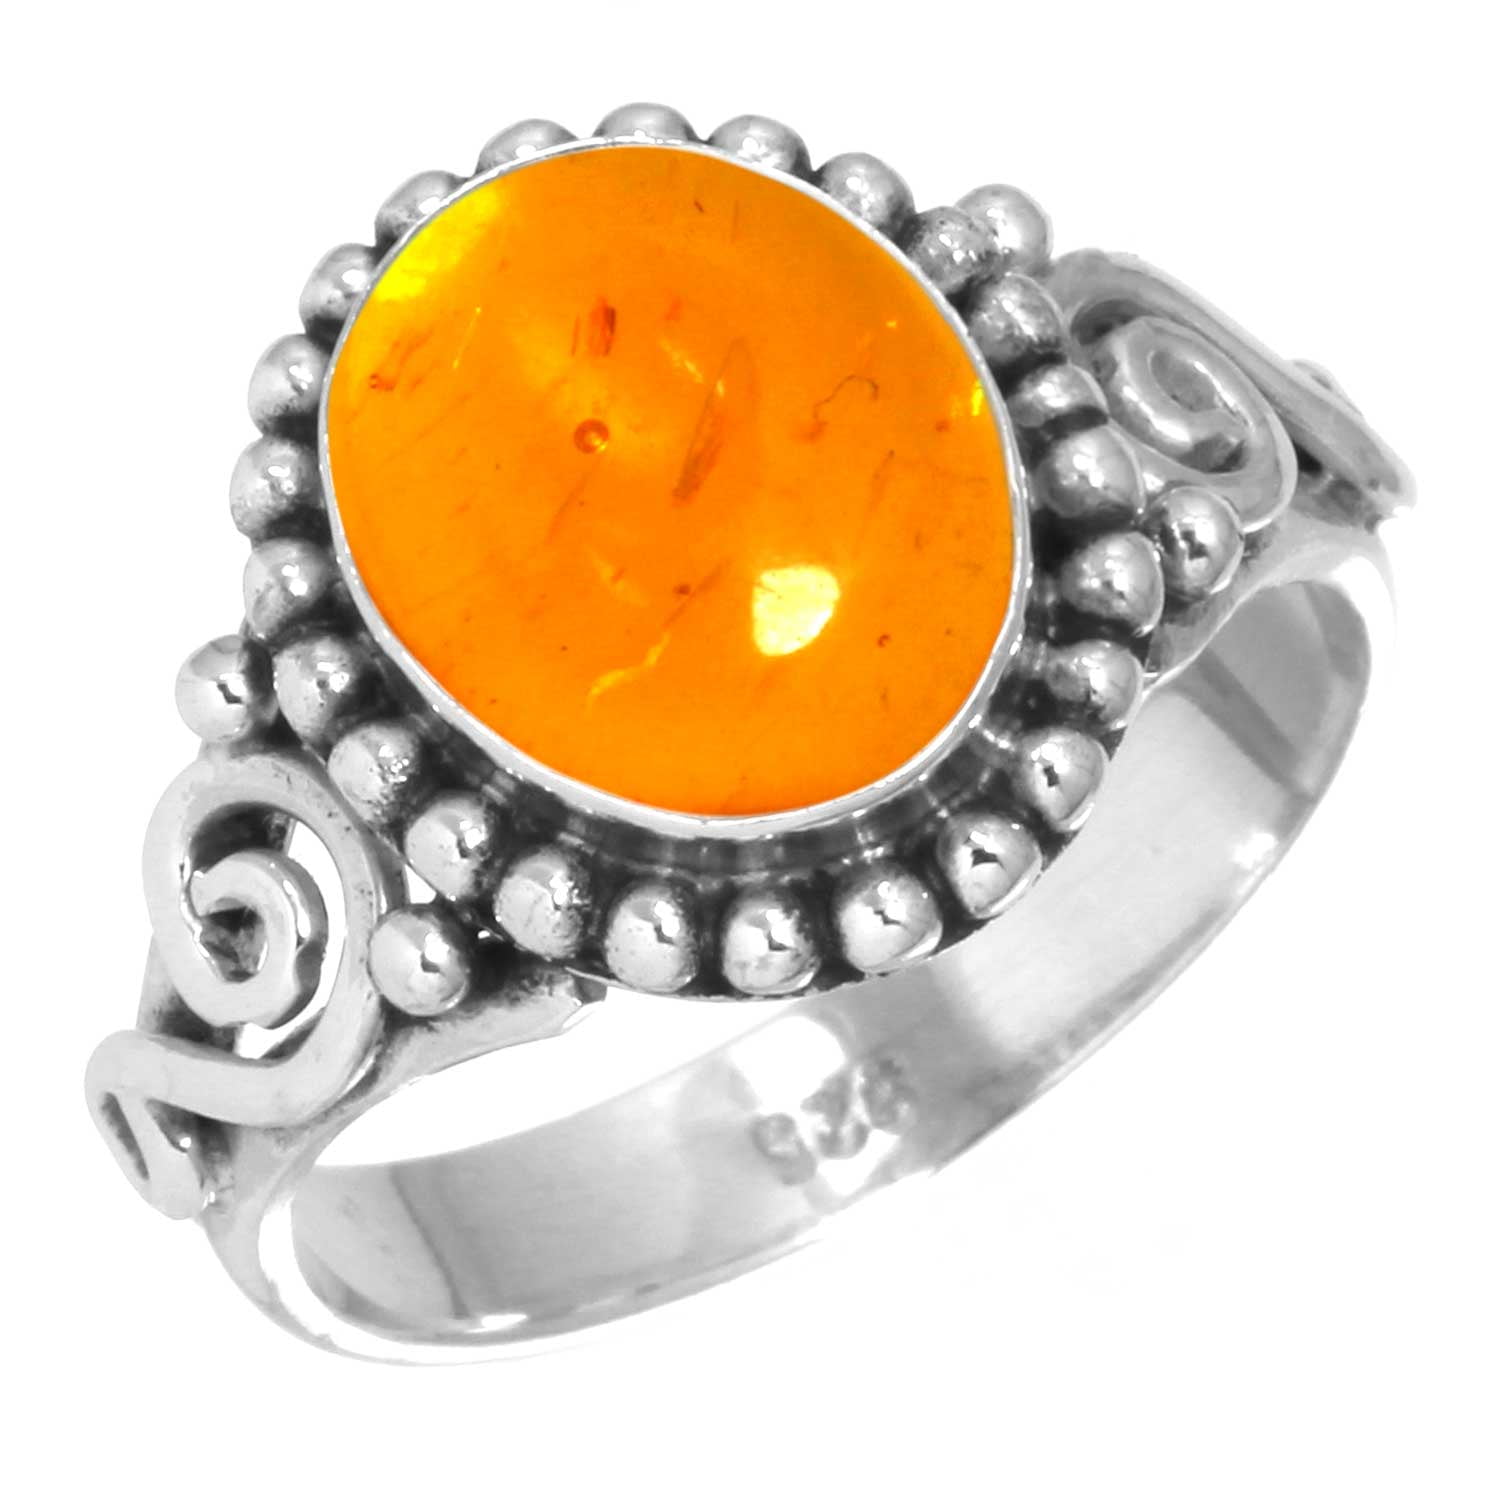 Handmade item Dispatches from a small business in India Materials: Silver,  Stone, White gold Gemstone: Citrine Gem colour: Orange Band colour: Silver  Style: Gothic Recycled